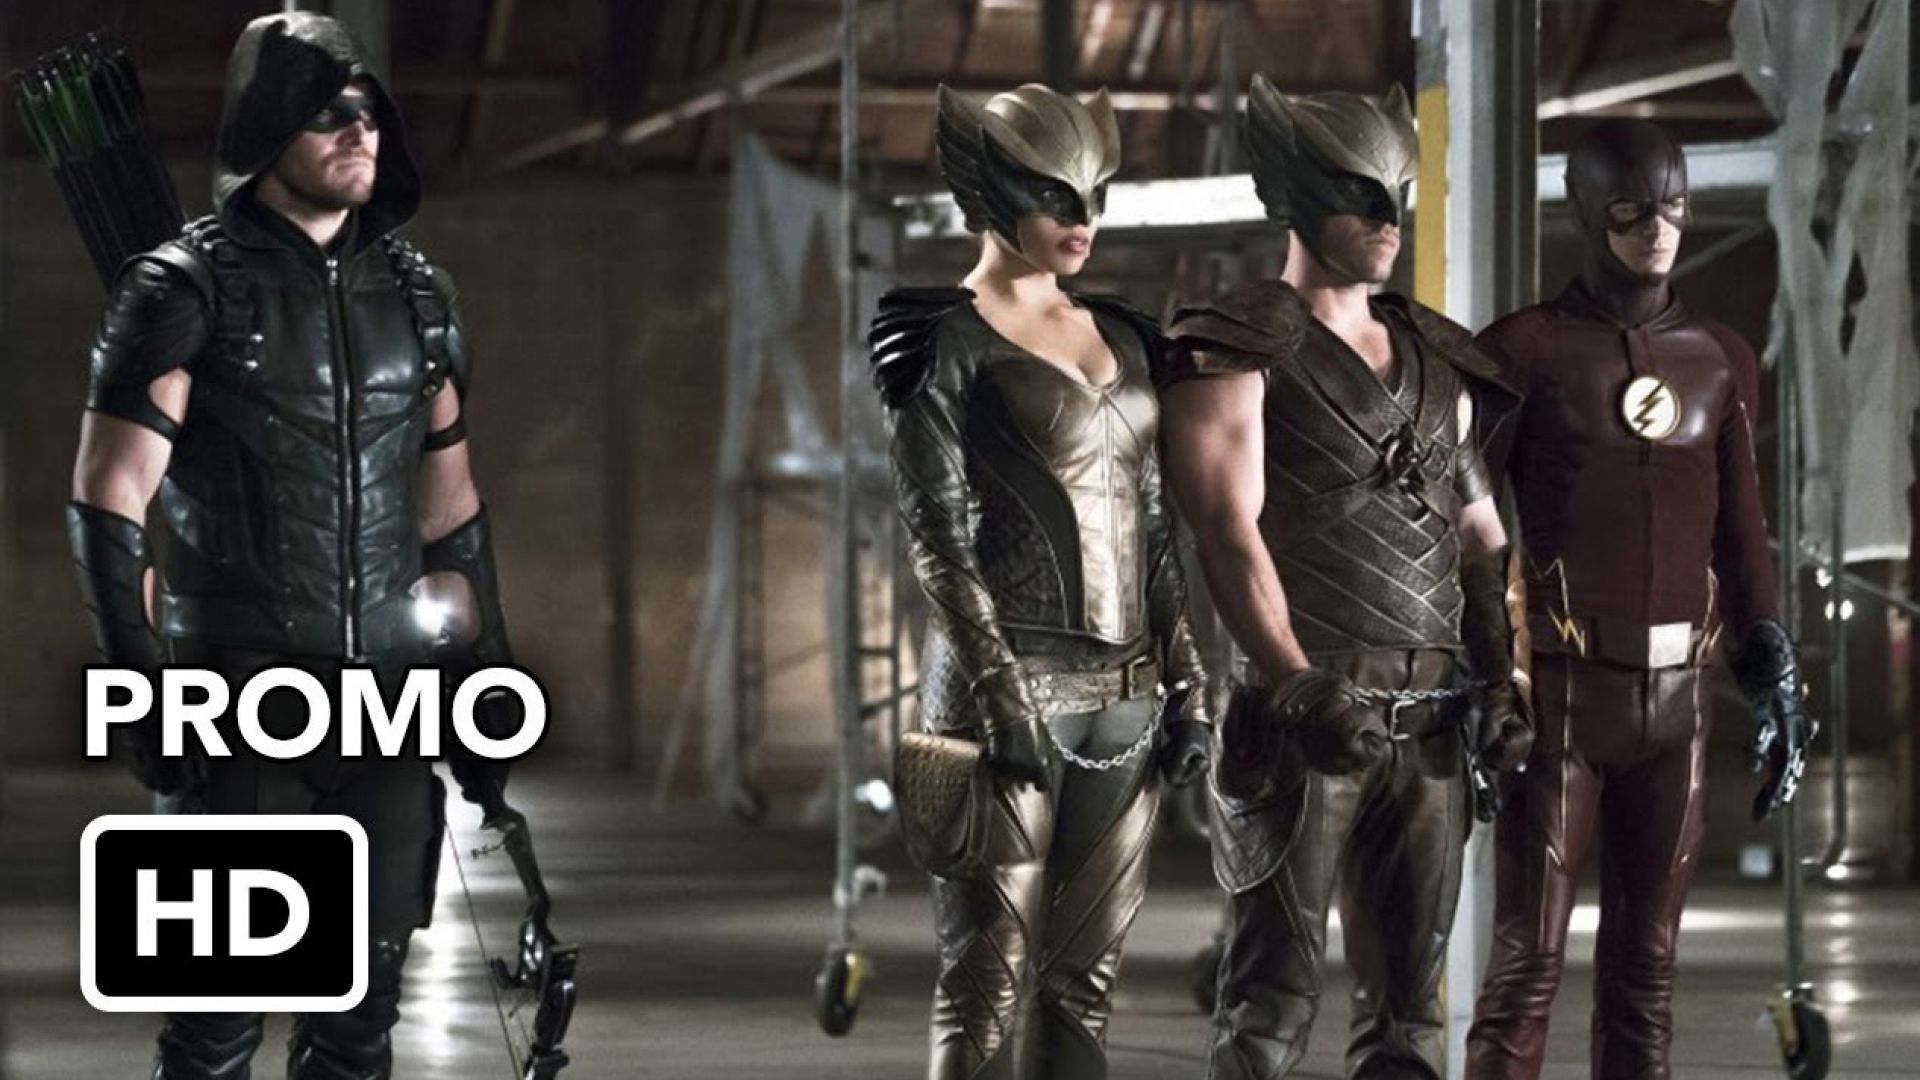 The Flash 2x08 Promo "Legends Of Today" Arrow Crossover Even